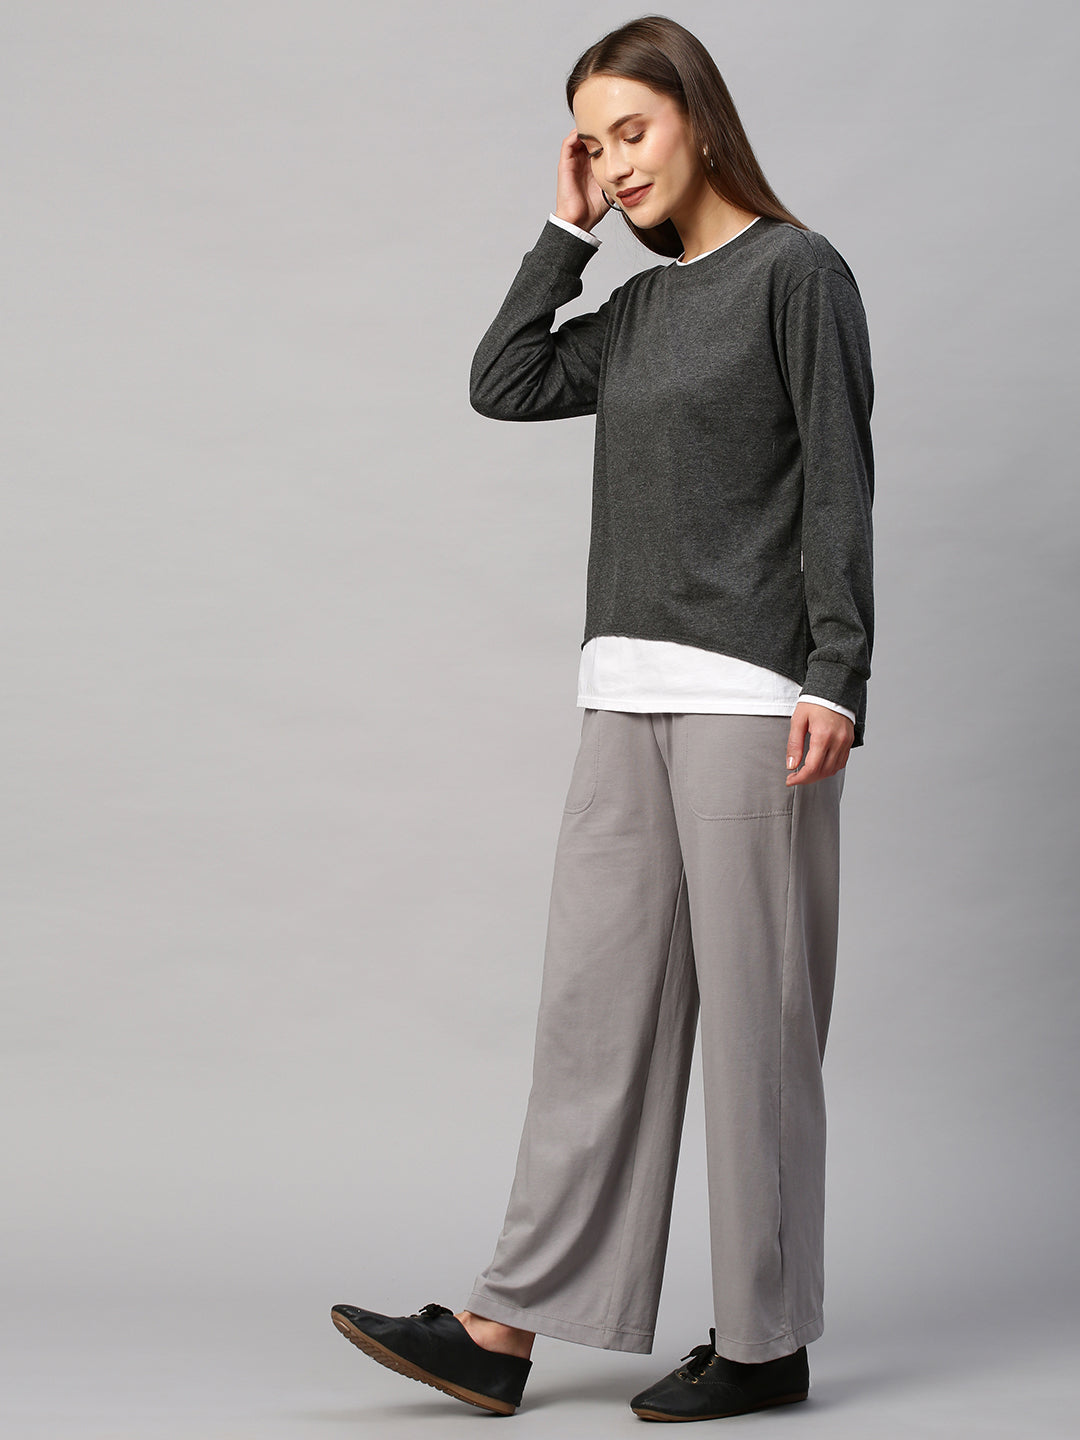 Tonal "Airport Look" With Faux Layered Sweat Tee & Lounge Pants